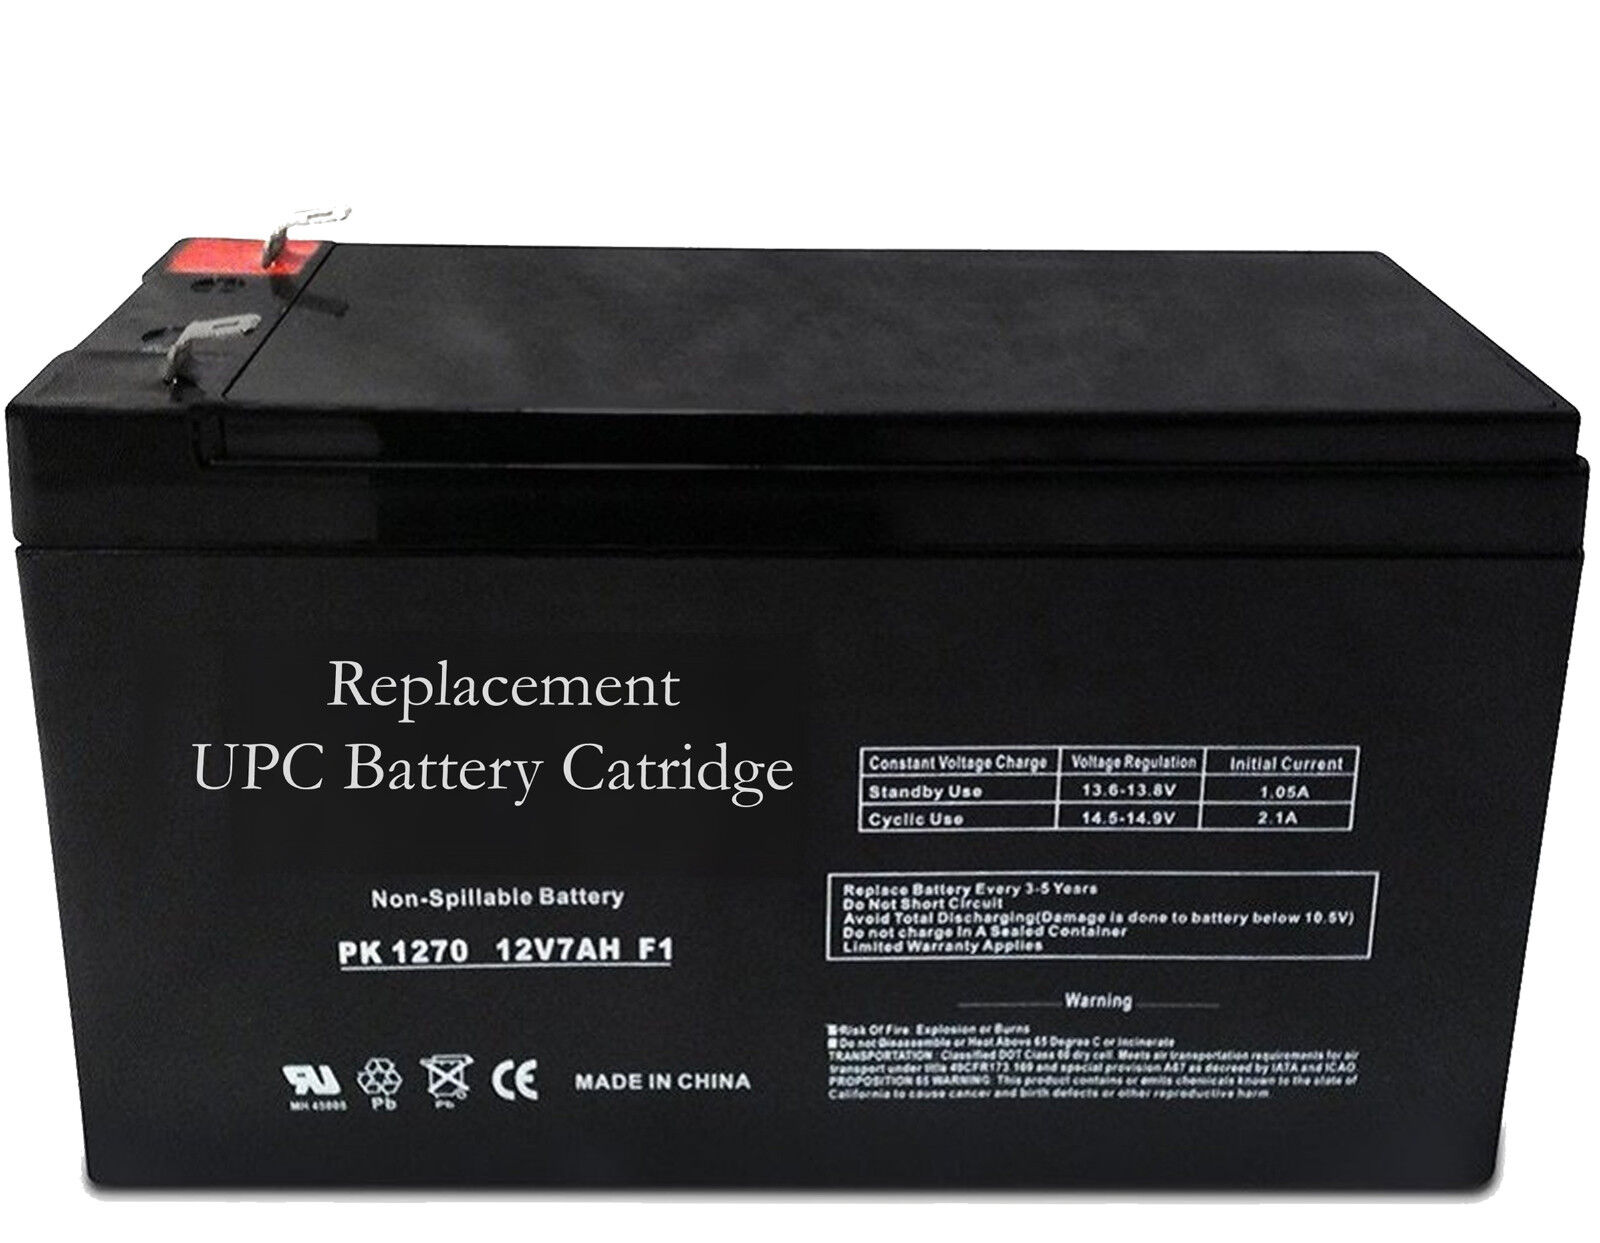  Replacement Professional Battery Log-lasting Cartridge for RBC17 Smart/Back UPS